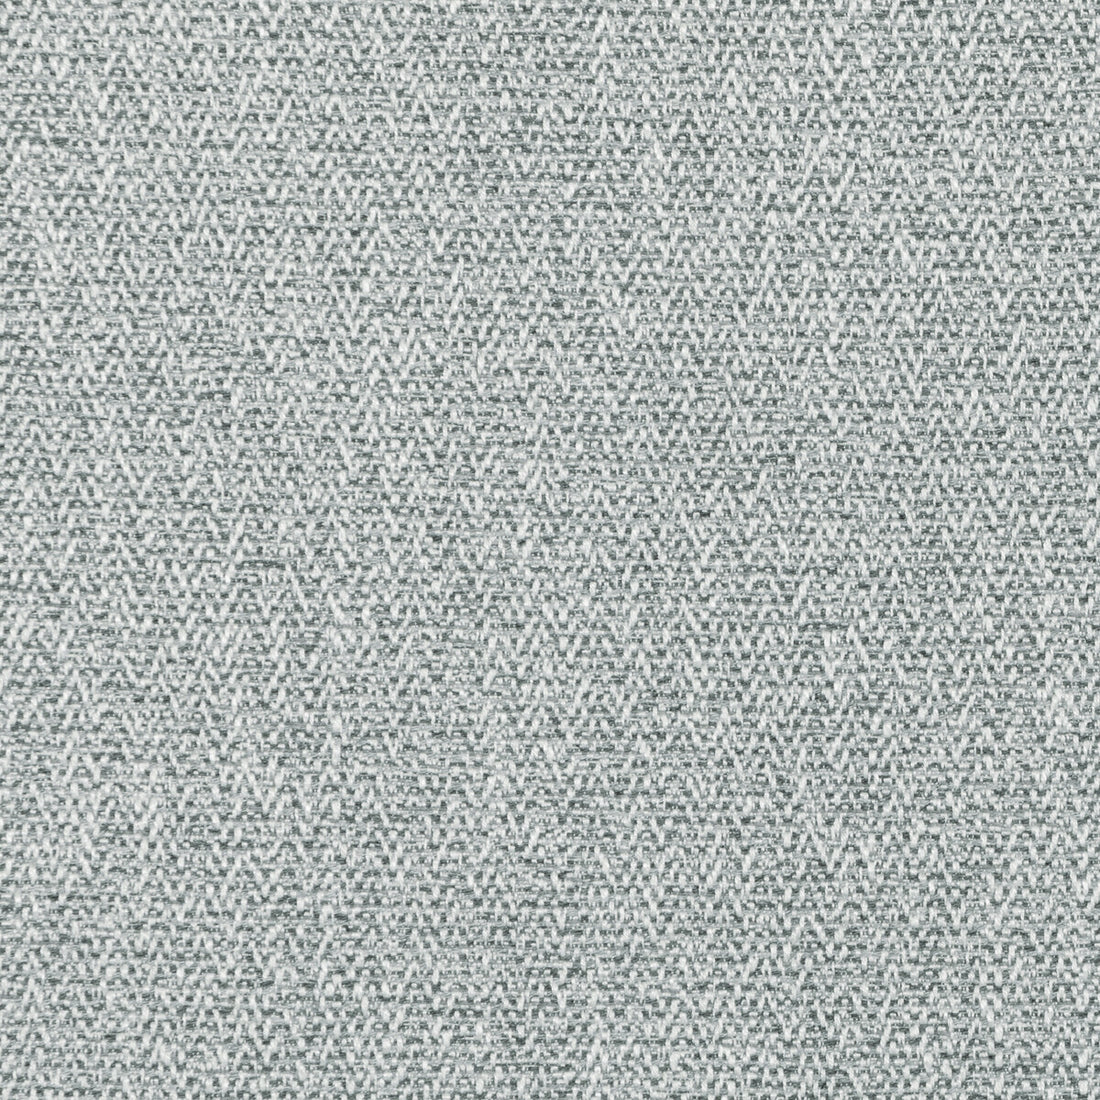 Saumur fabric in platinum color - pattern 36107.11.0 - by Kravet Couture in the Luxury Textures II collection